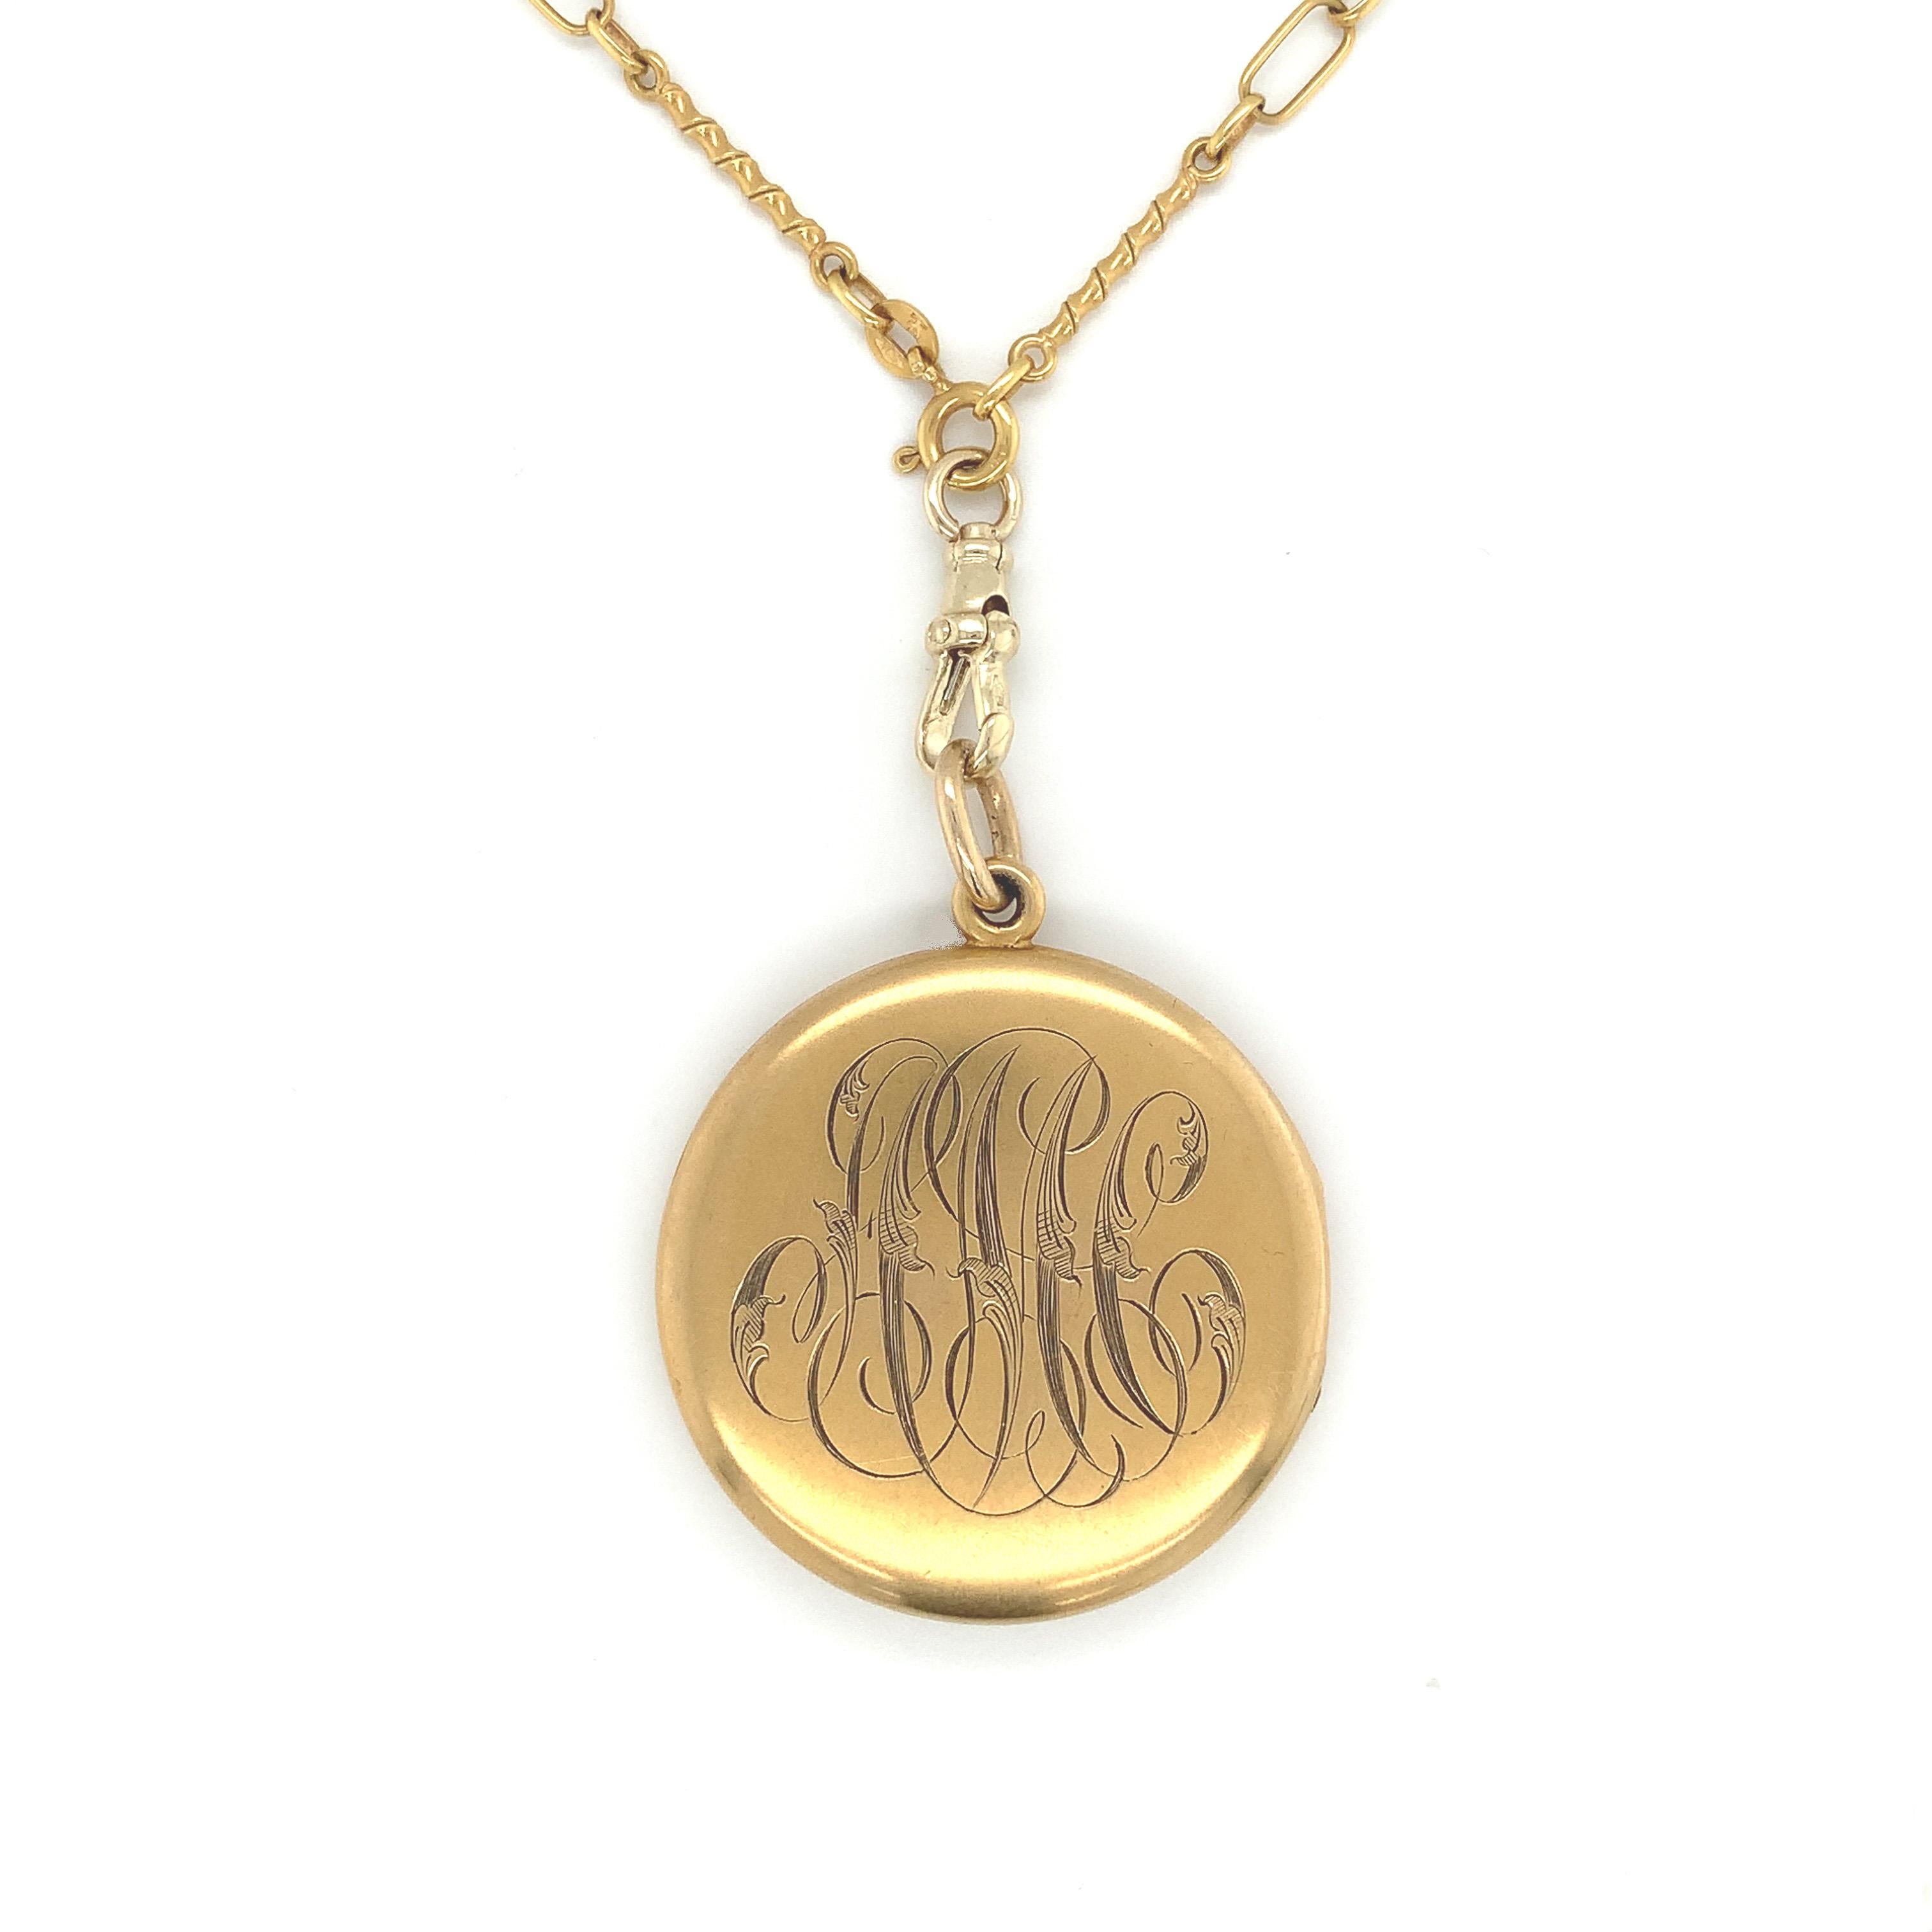 14K yellow gold large round Victorian locket on 18K yellow gold fancy bar link chain. The locket measures 2